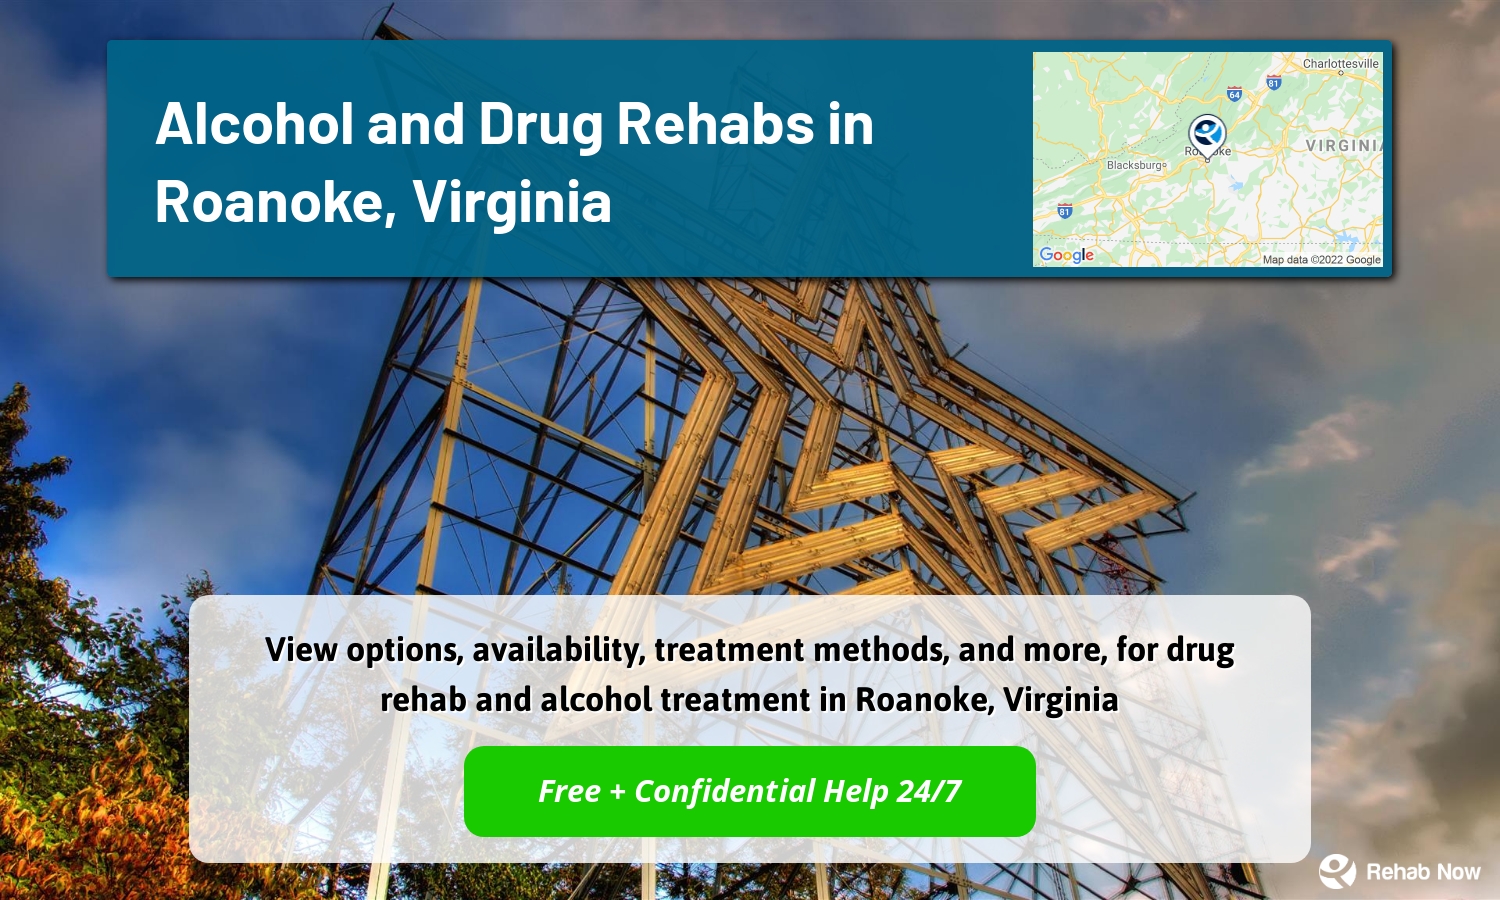 View options, availability, treatment methods, and more, for drug rehab and alcohol treatment in Roanoke, Virginia